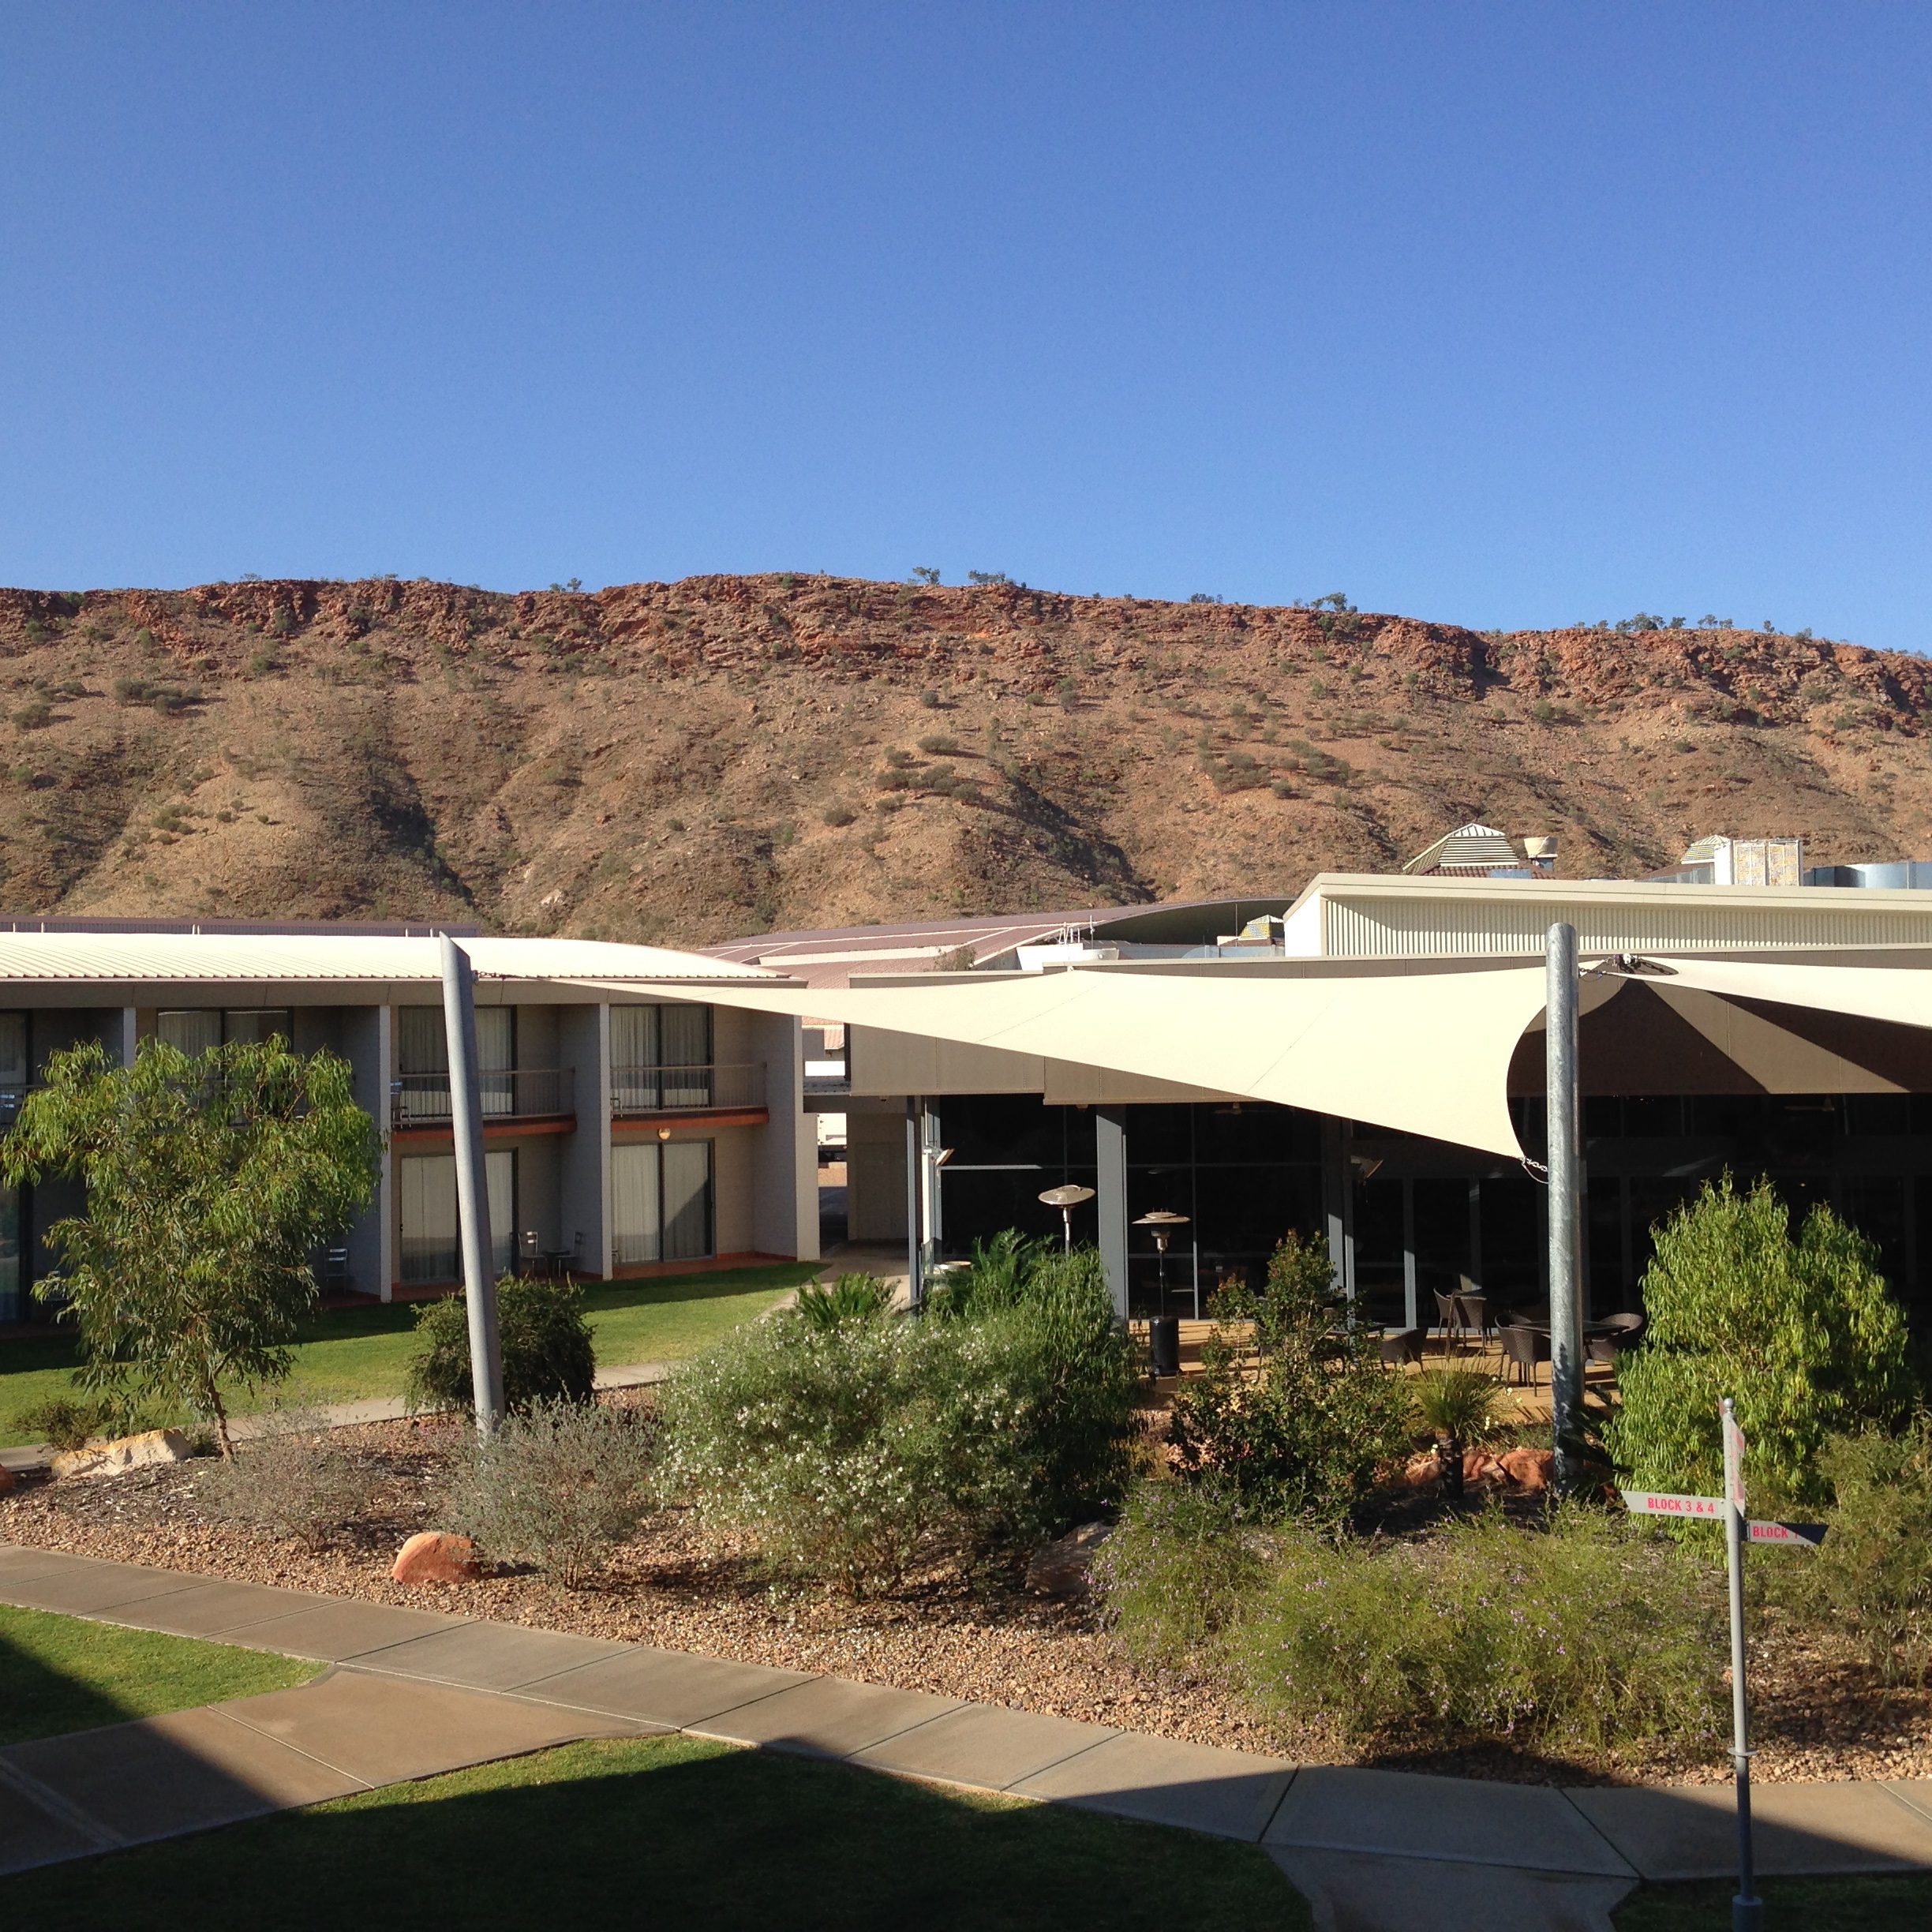 Our Hotel in Alice Springs